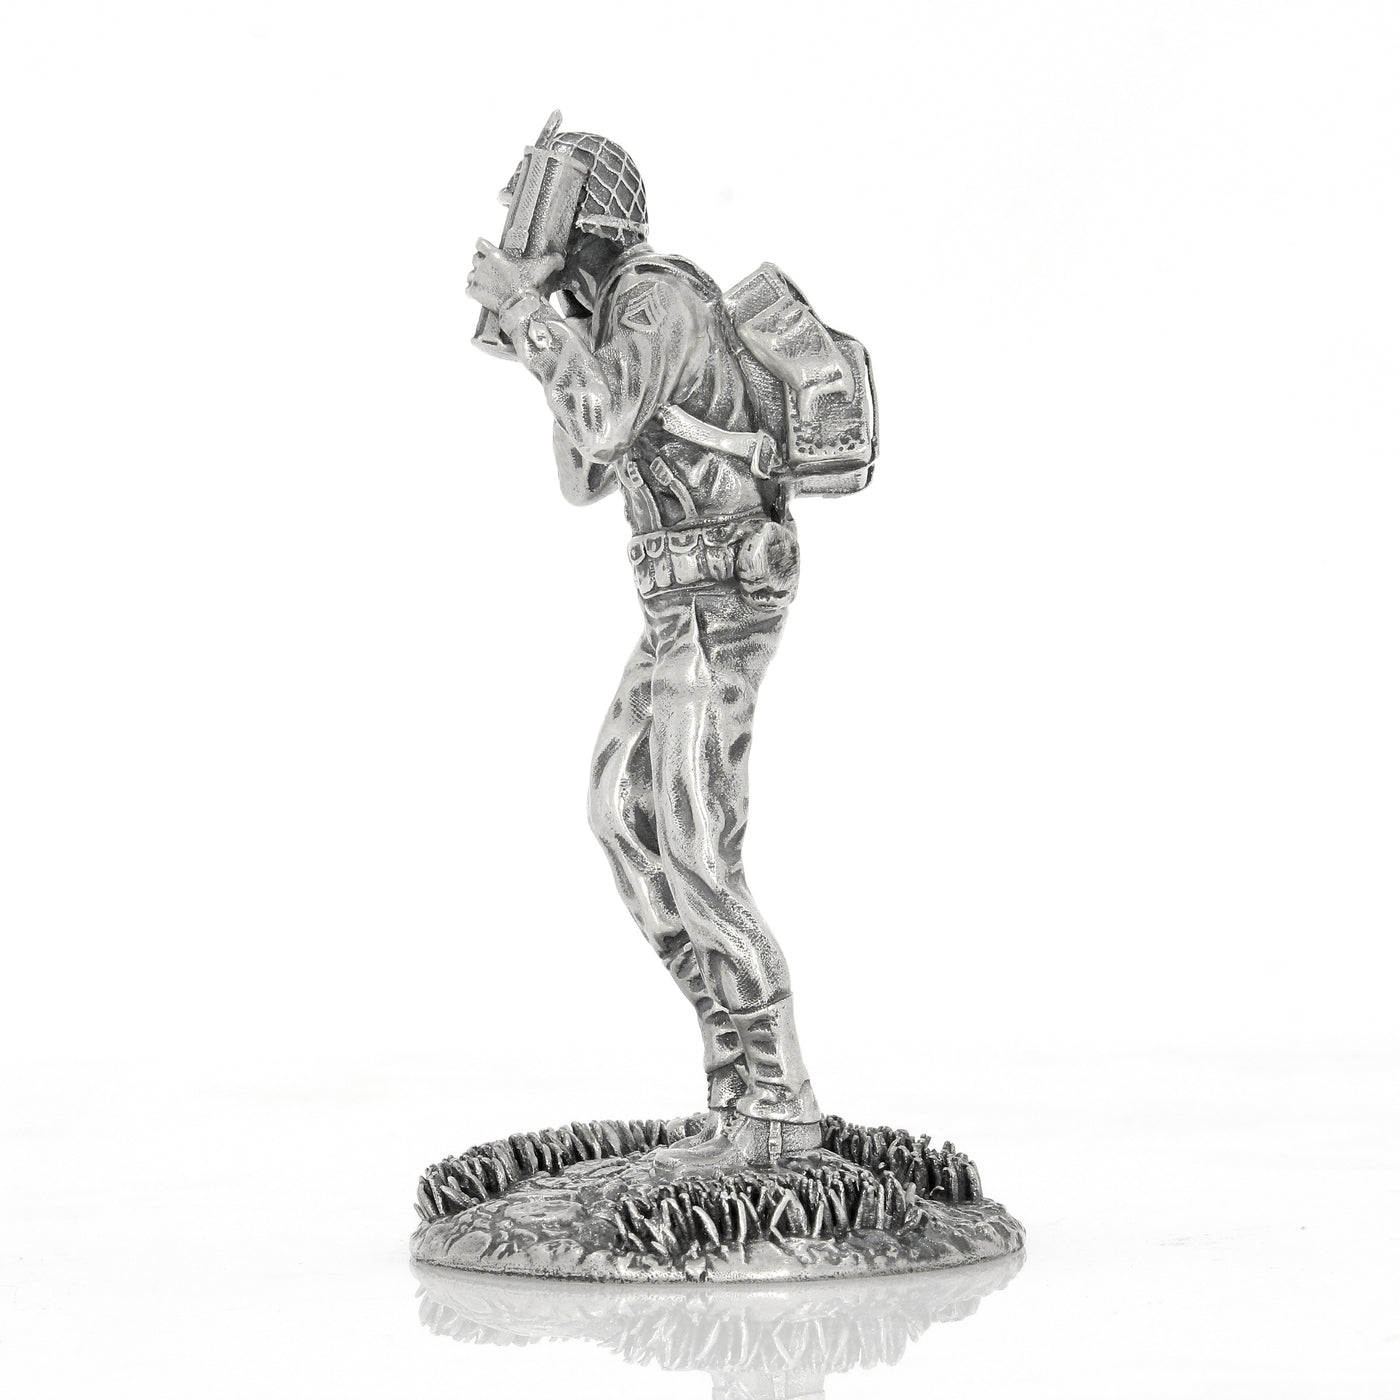 Signal Corp "Eyes on Earl" - Silver Soldier - SilverStatues.com